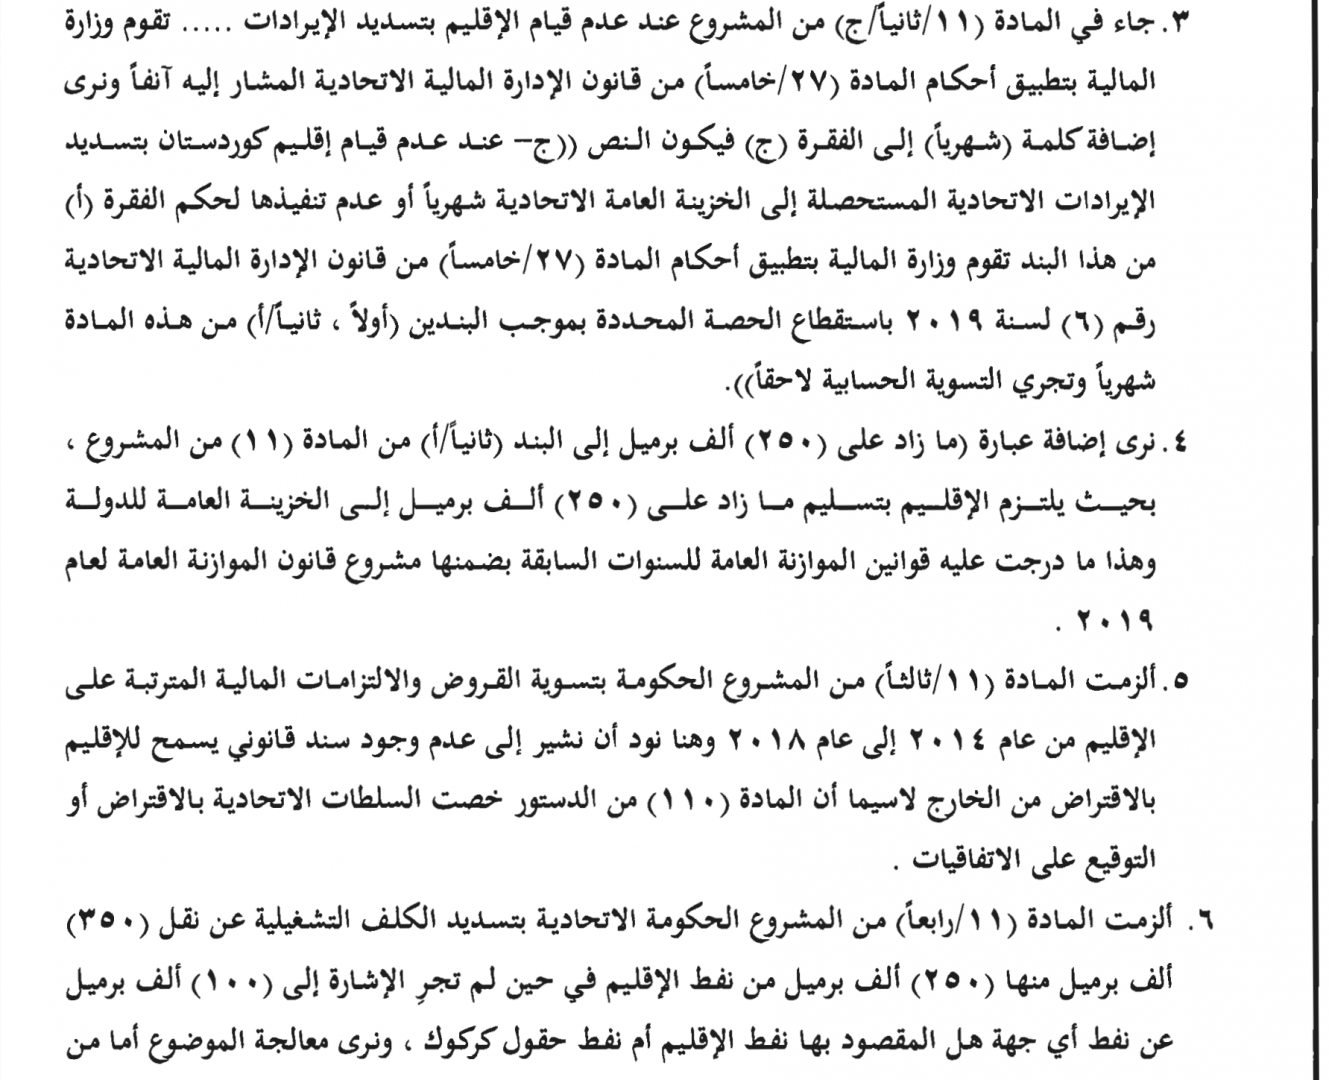 Salih: to insure “Justice” to all Iraqis